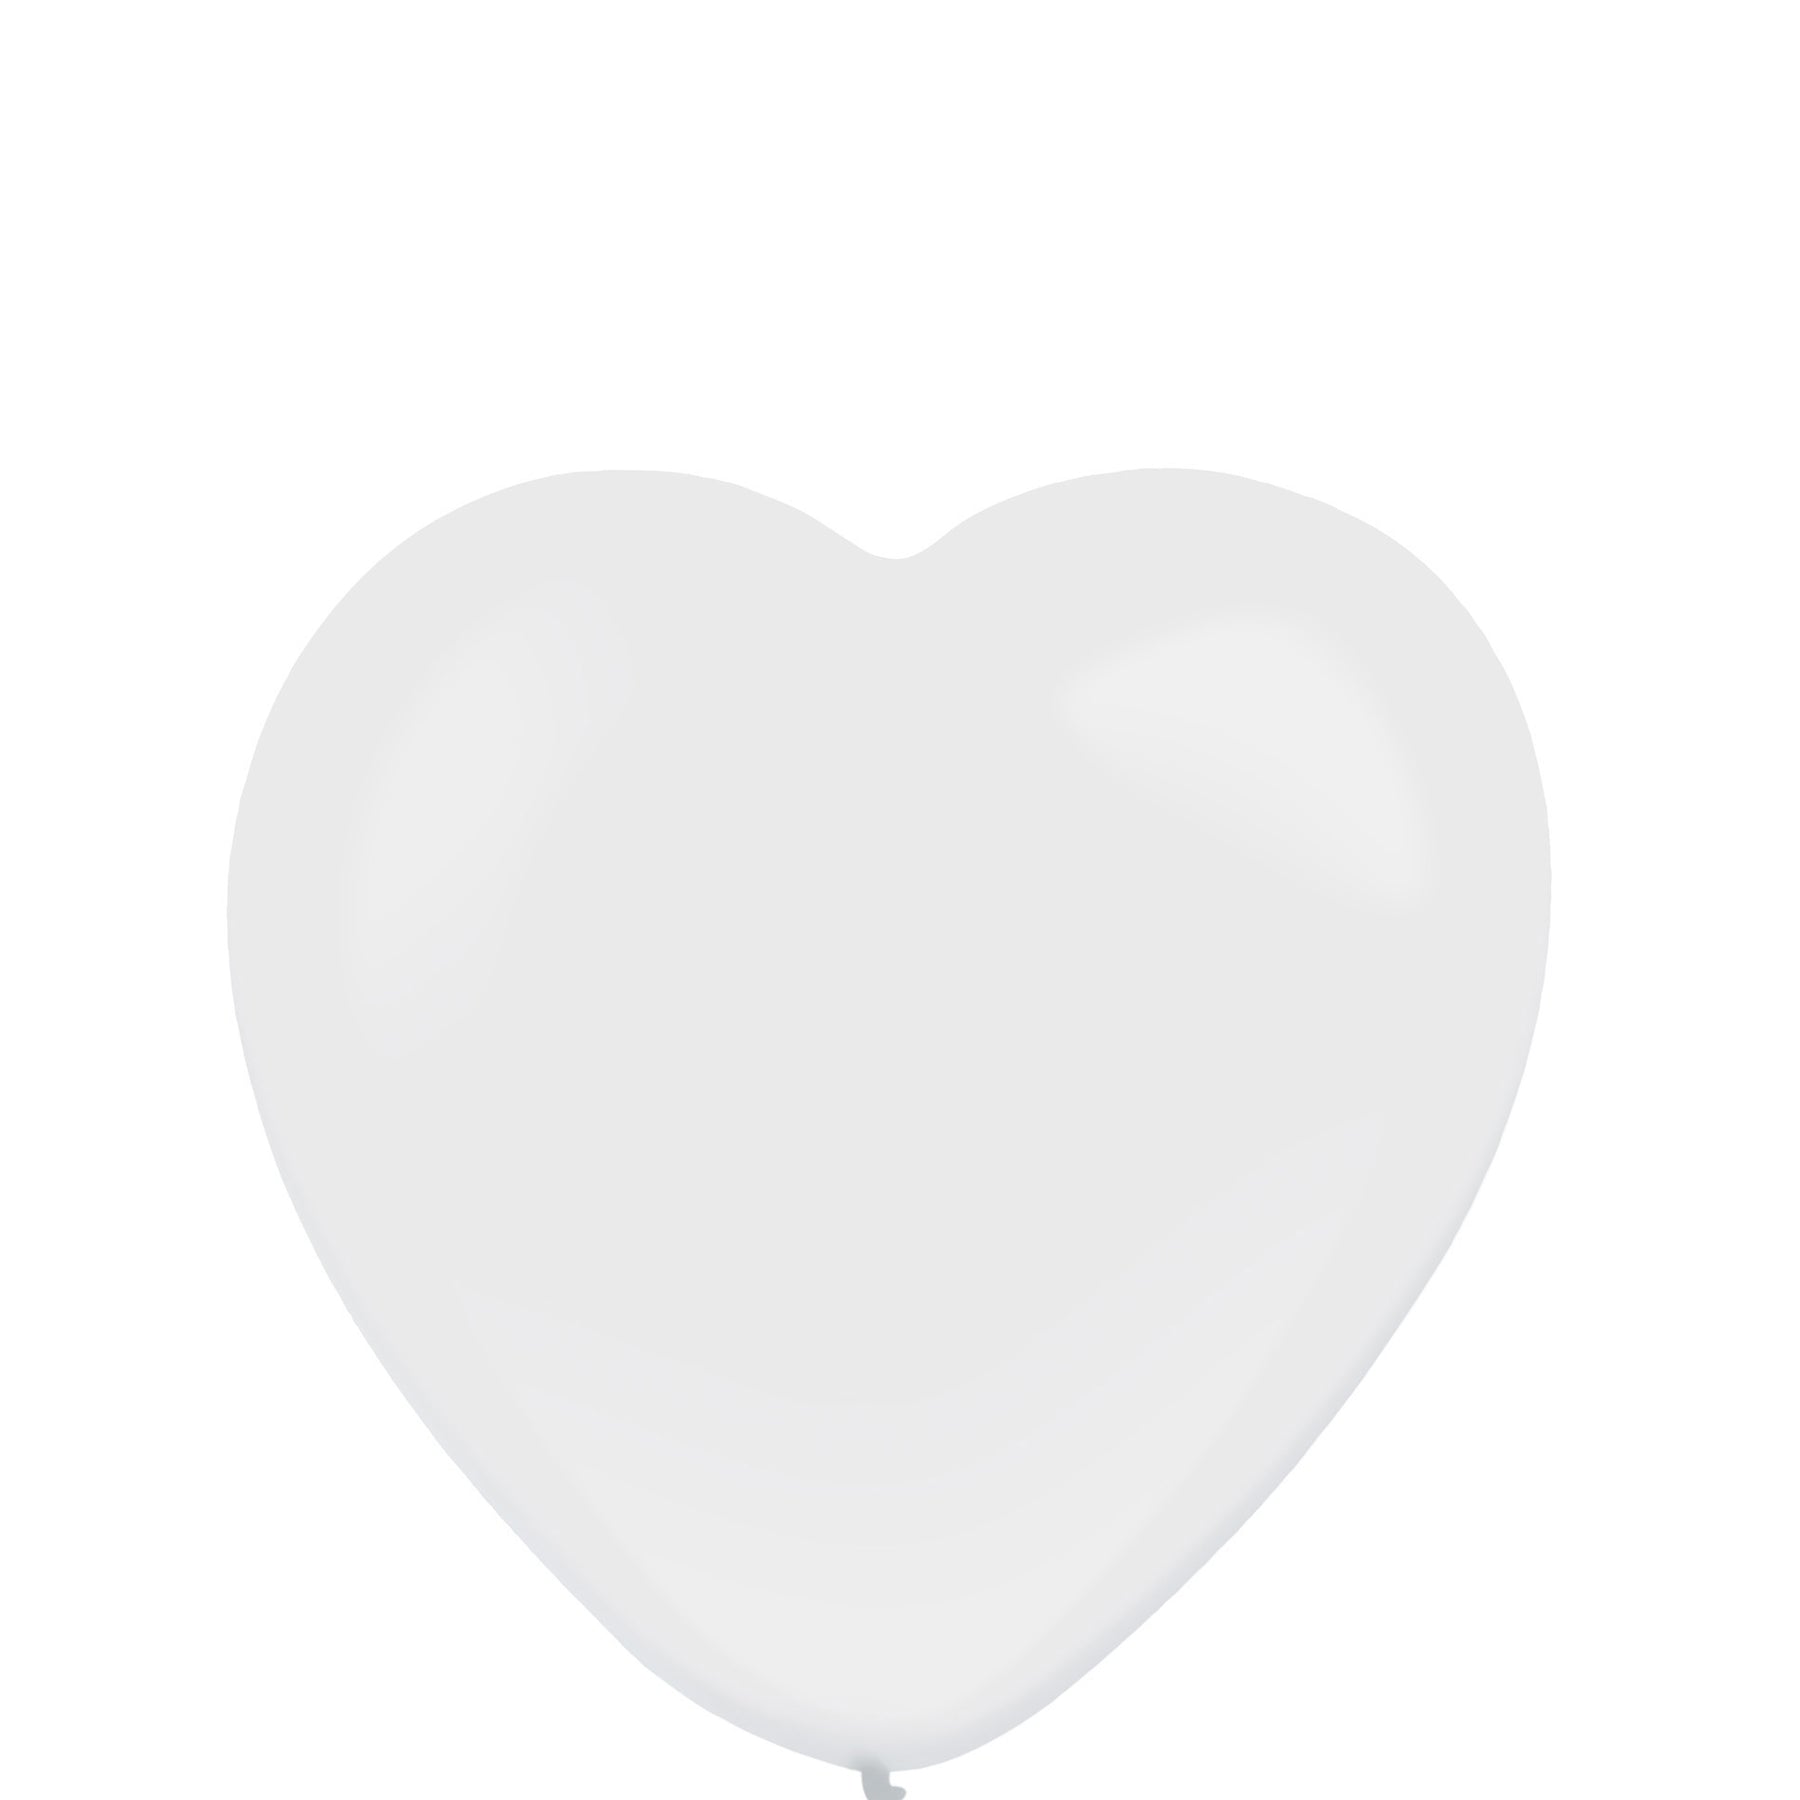 Frosty White Standard Heart Latex Balloons 50pcs Balloons & Streamers - Party Centre